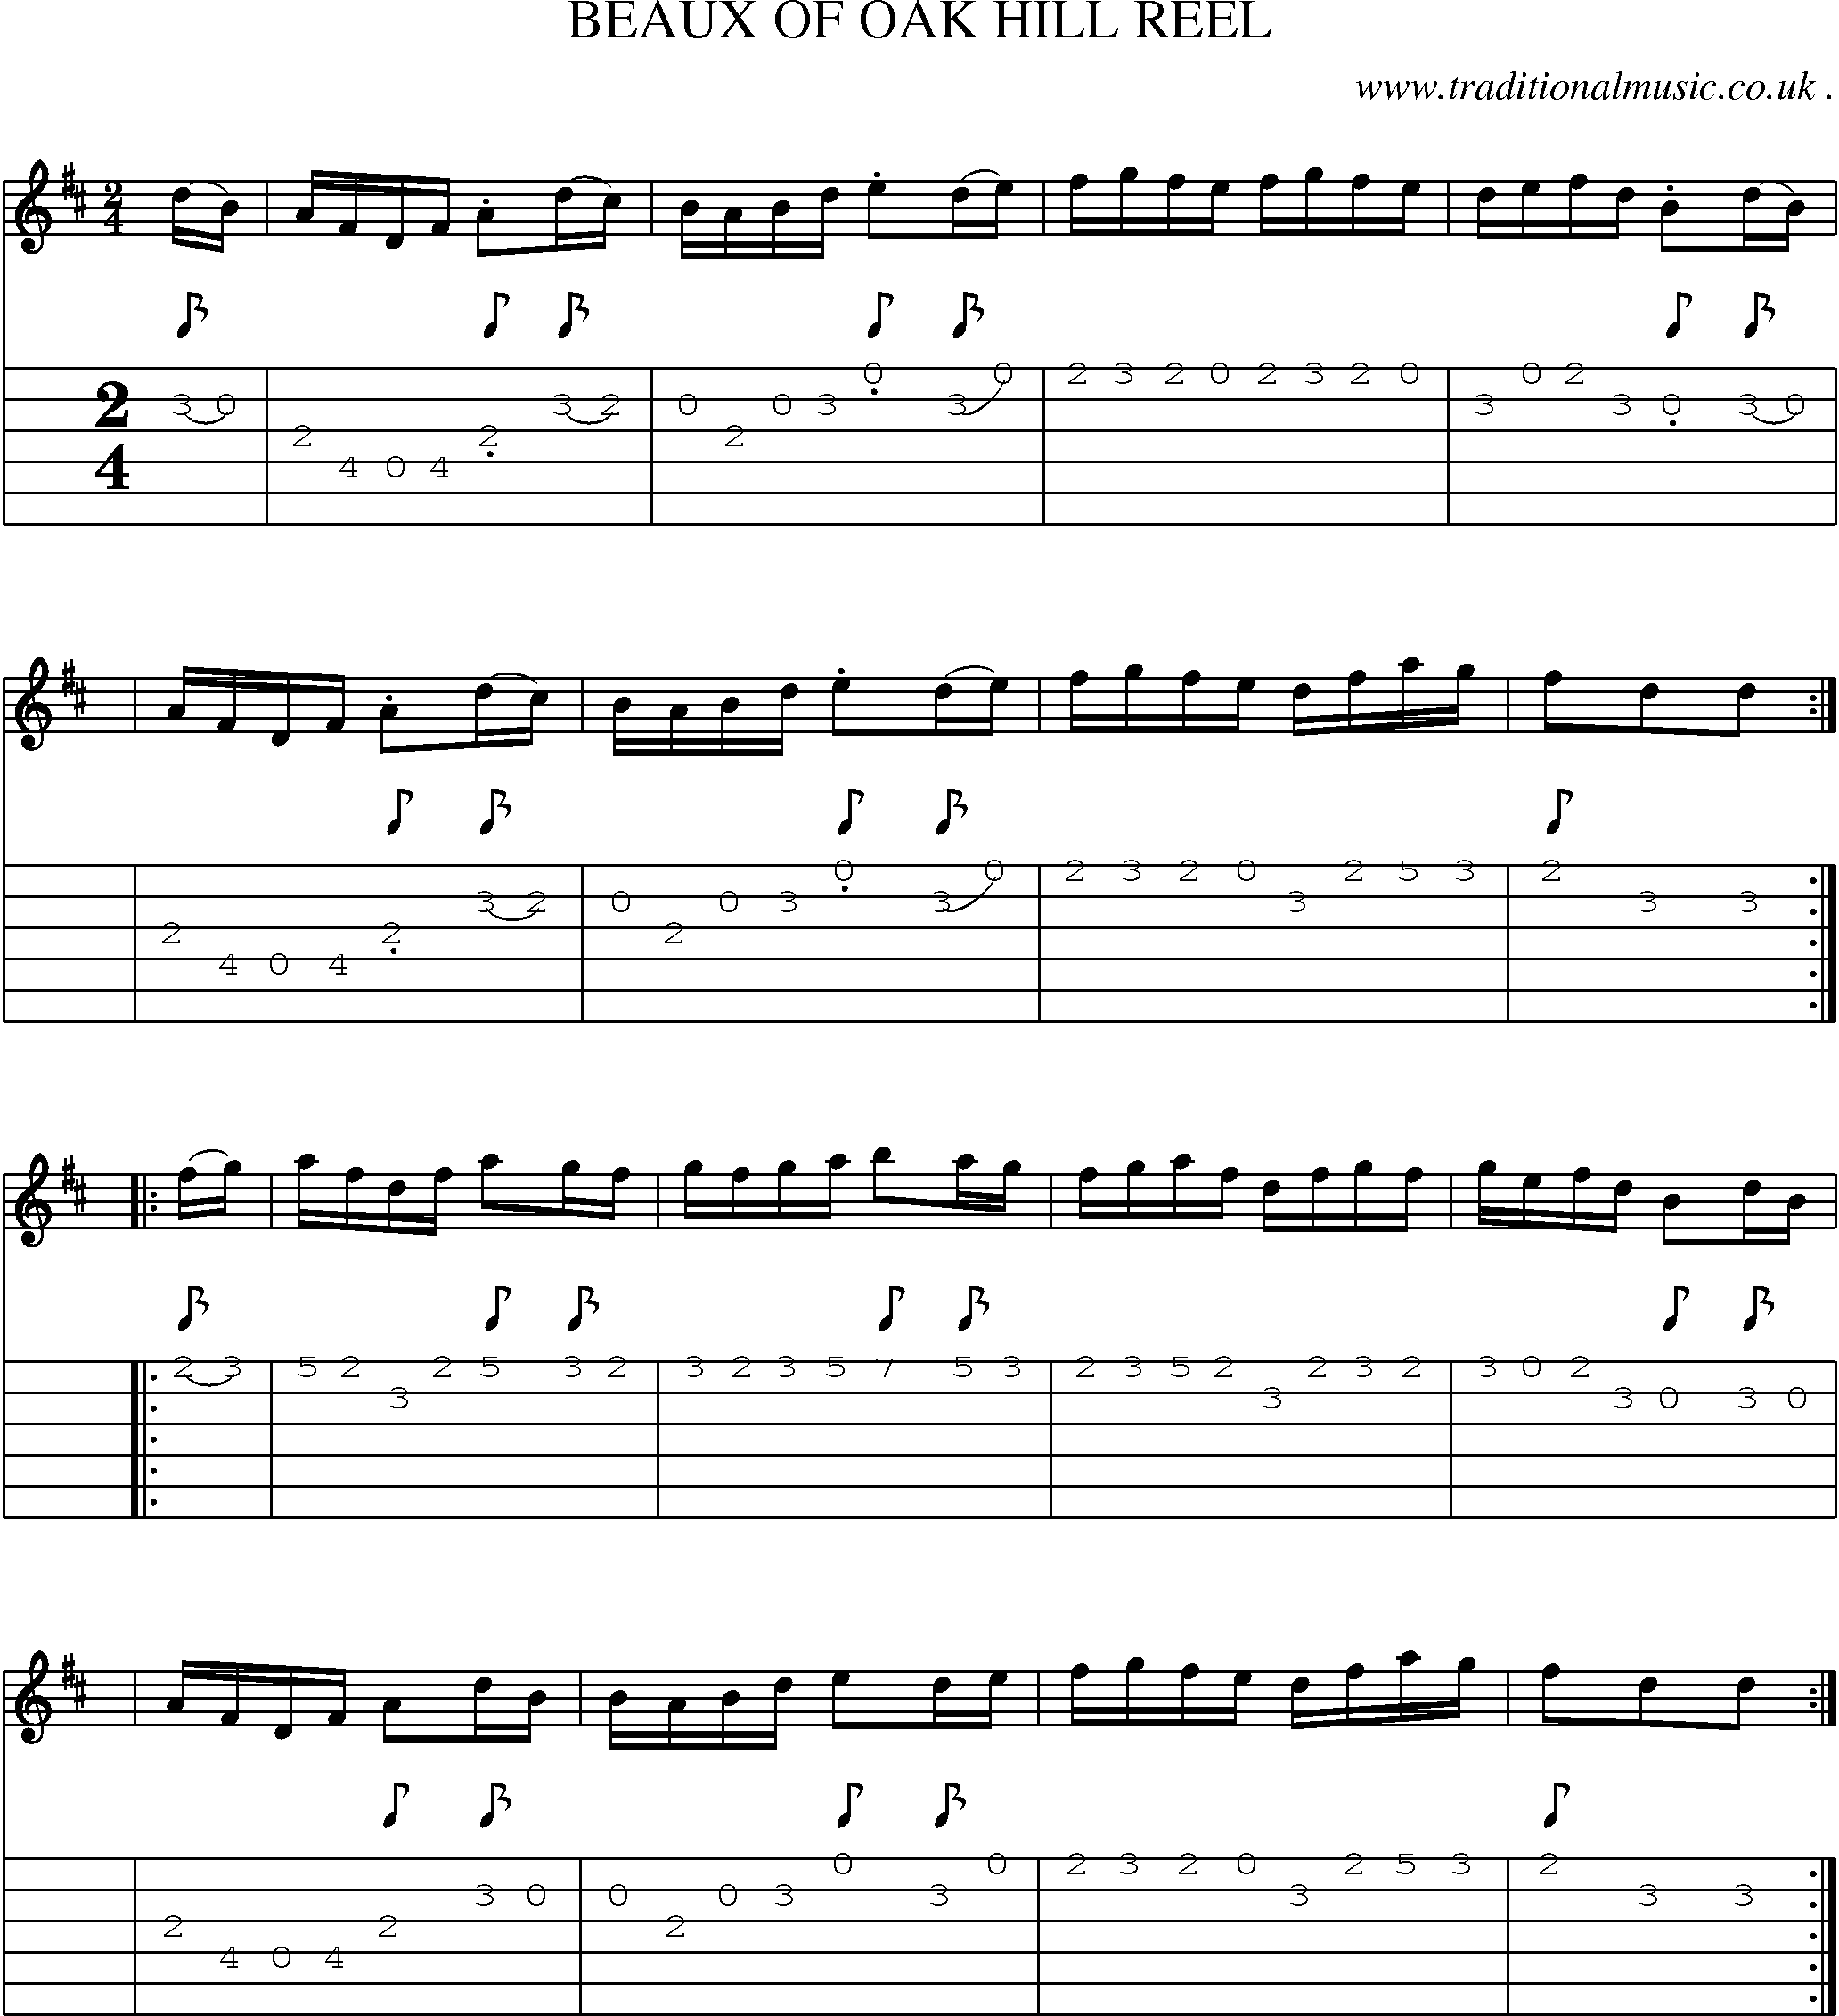 Sheet-Music and Guitar Tabs for Beaux Of Oak Hill Reel